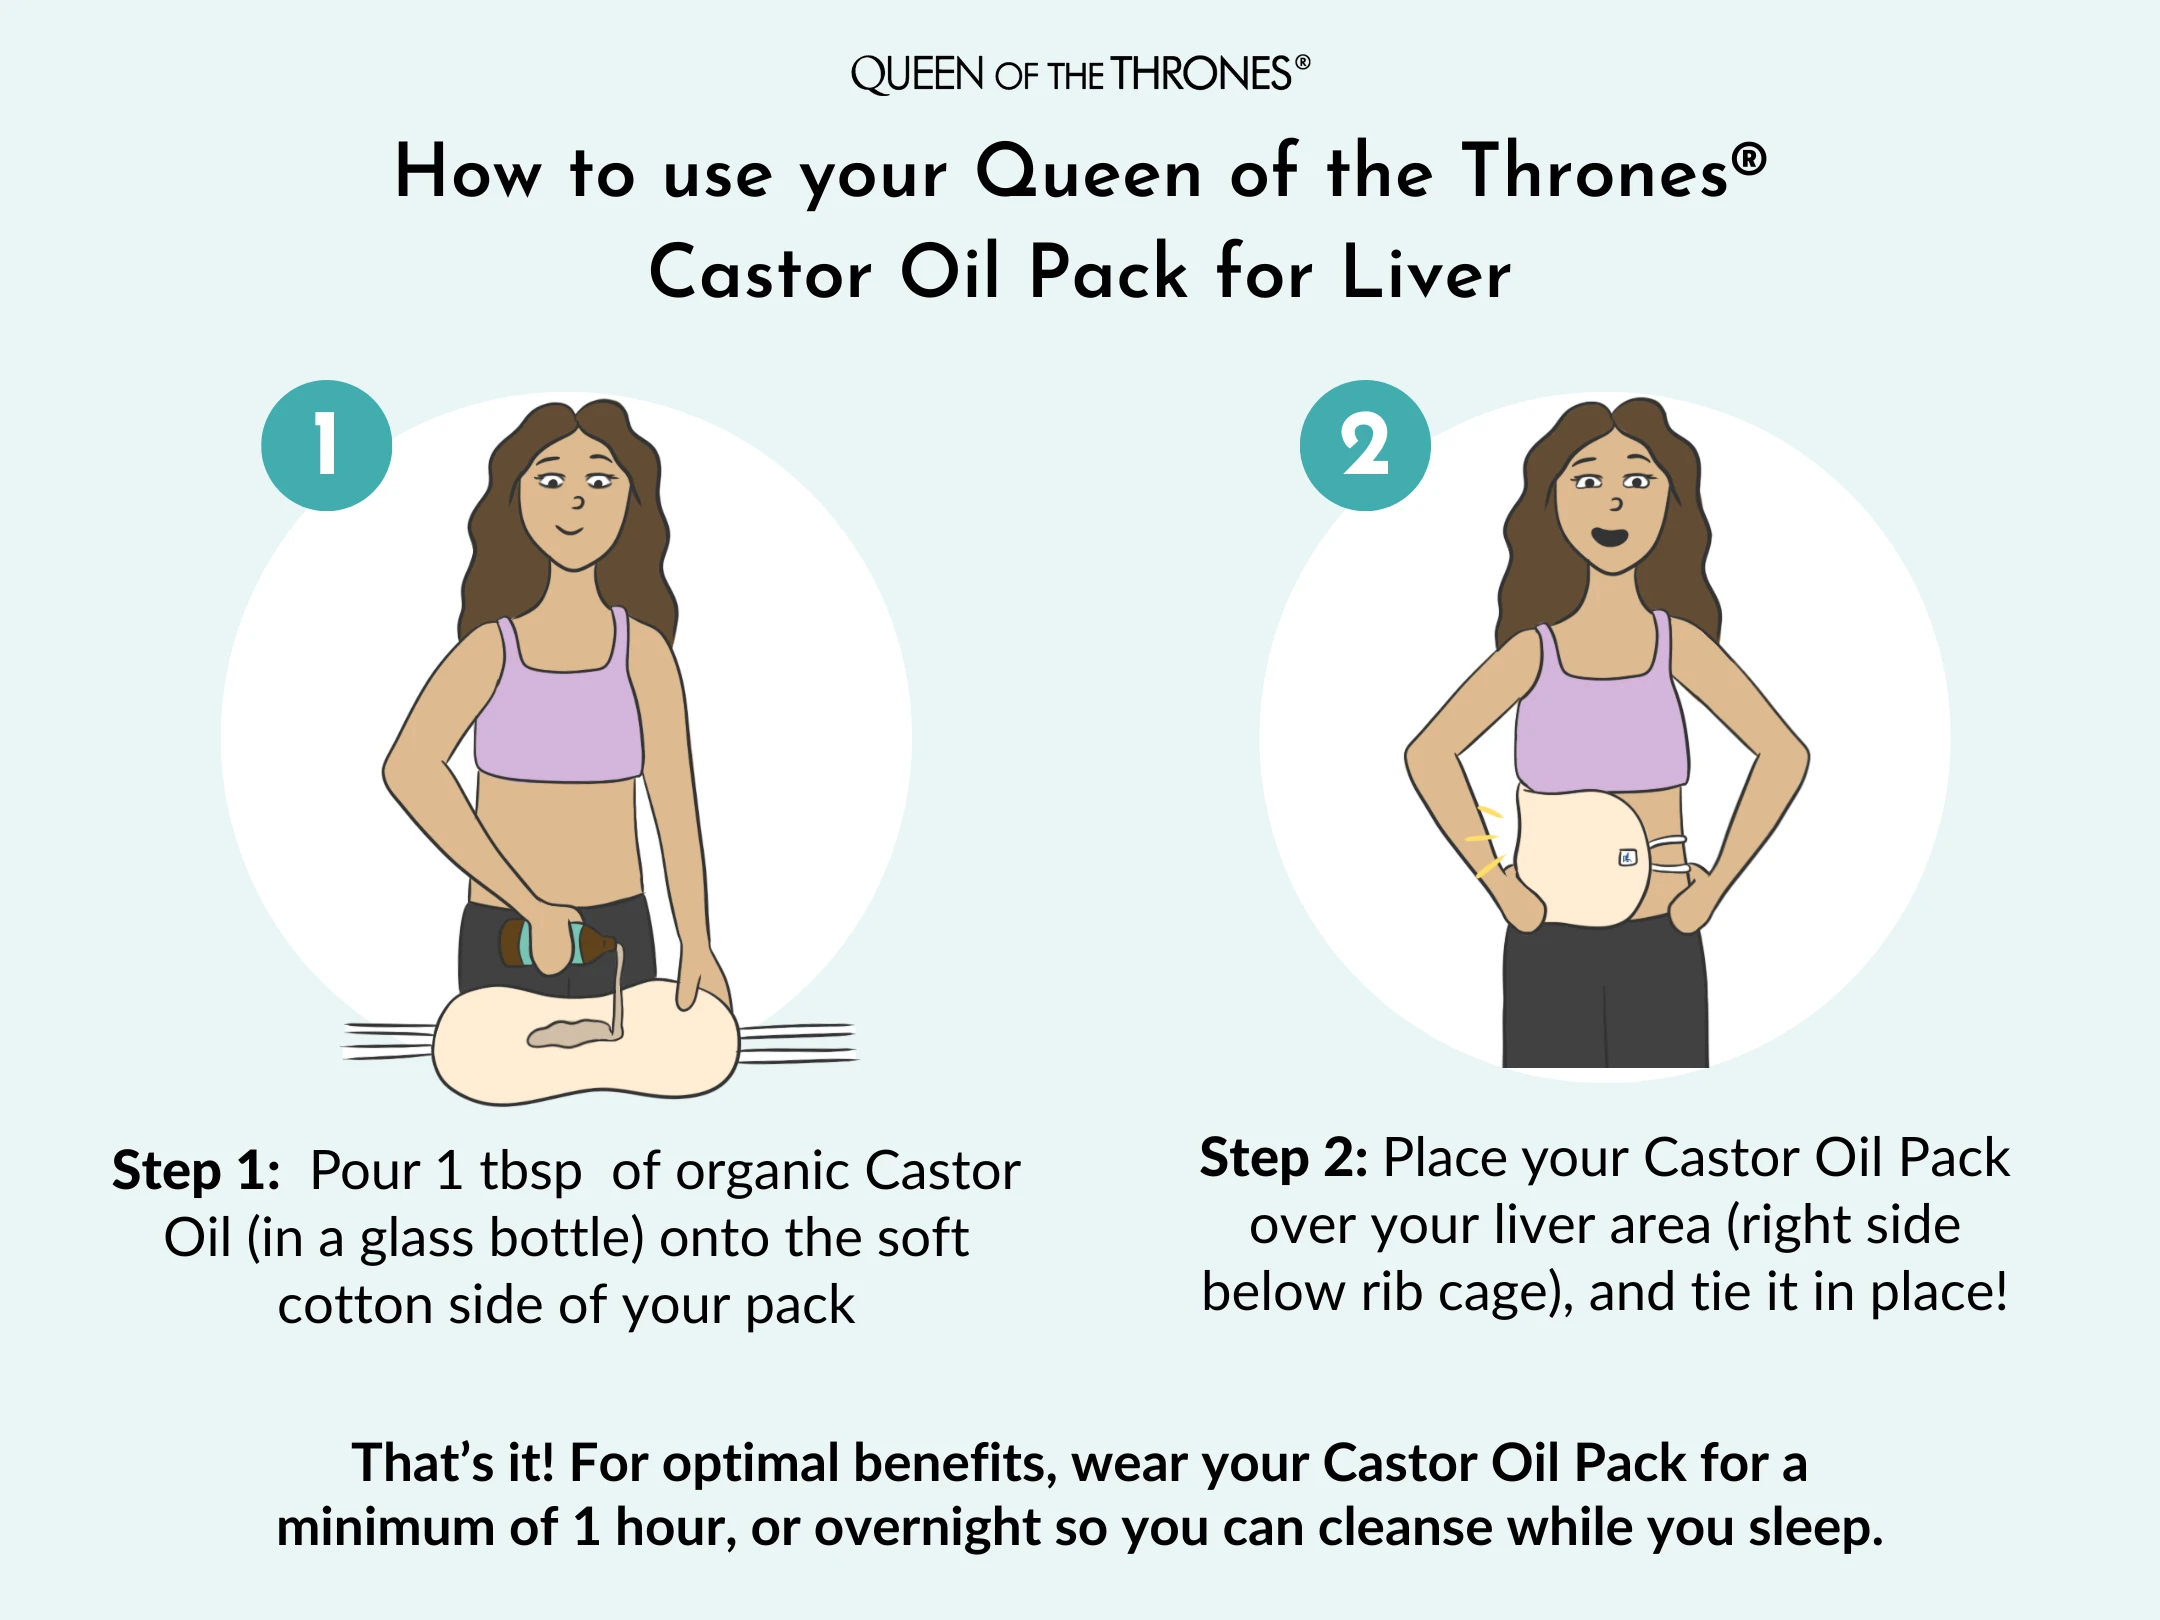 Learn how to use Castor oil Packs for liver designed by Queen of the Thrones